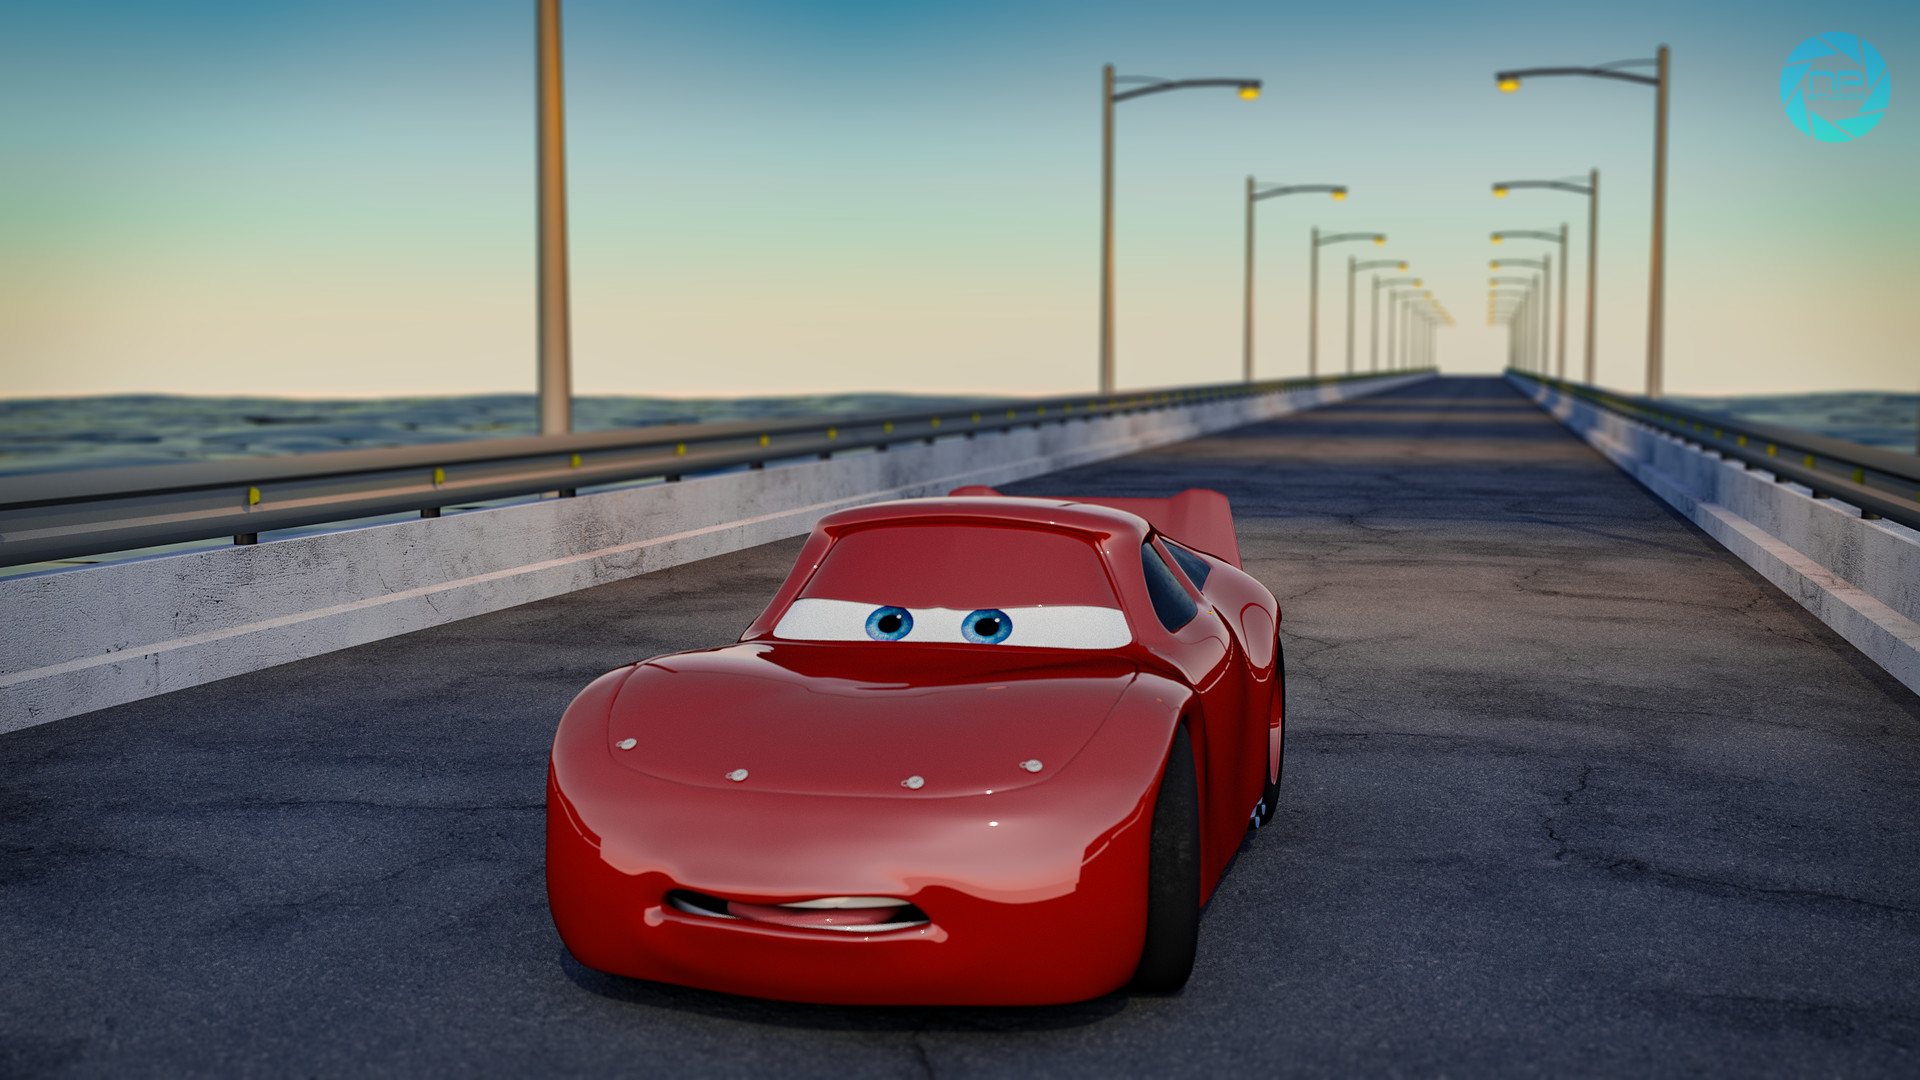 Lightning Mcqueen Video Games Steve Wallpapers 2020 - lightning mcqueen is in jail cars roblox obby crazy obstacle course game play video dailymotion